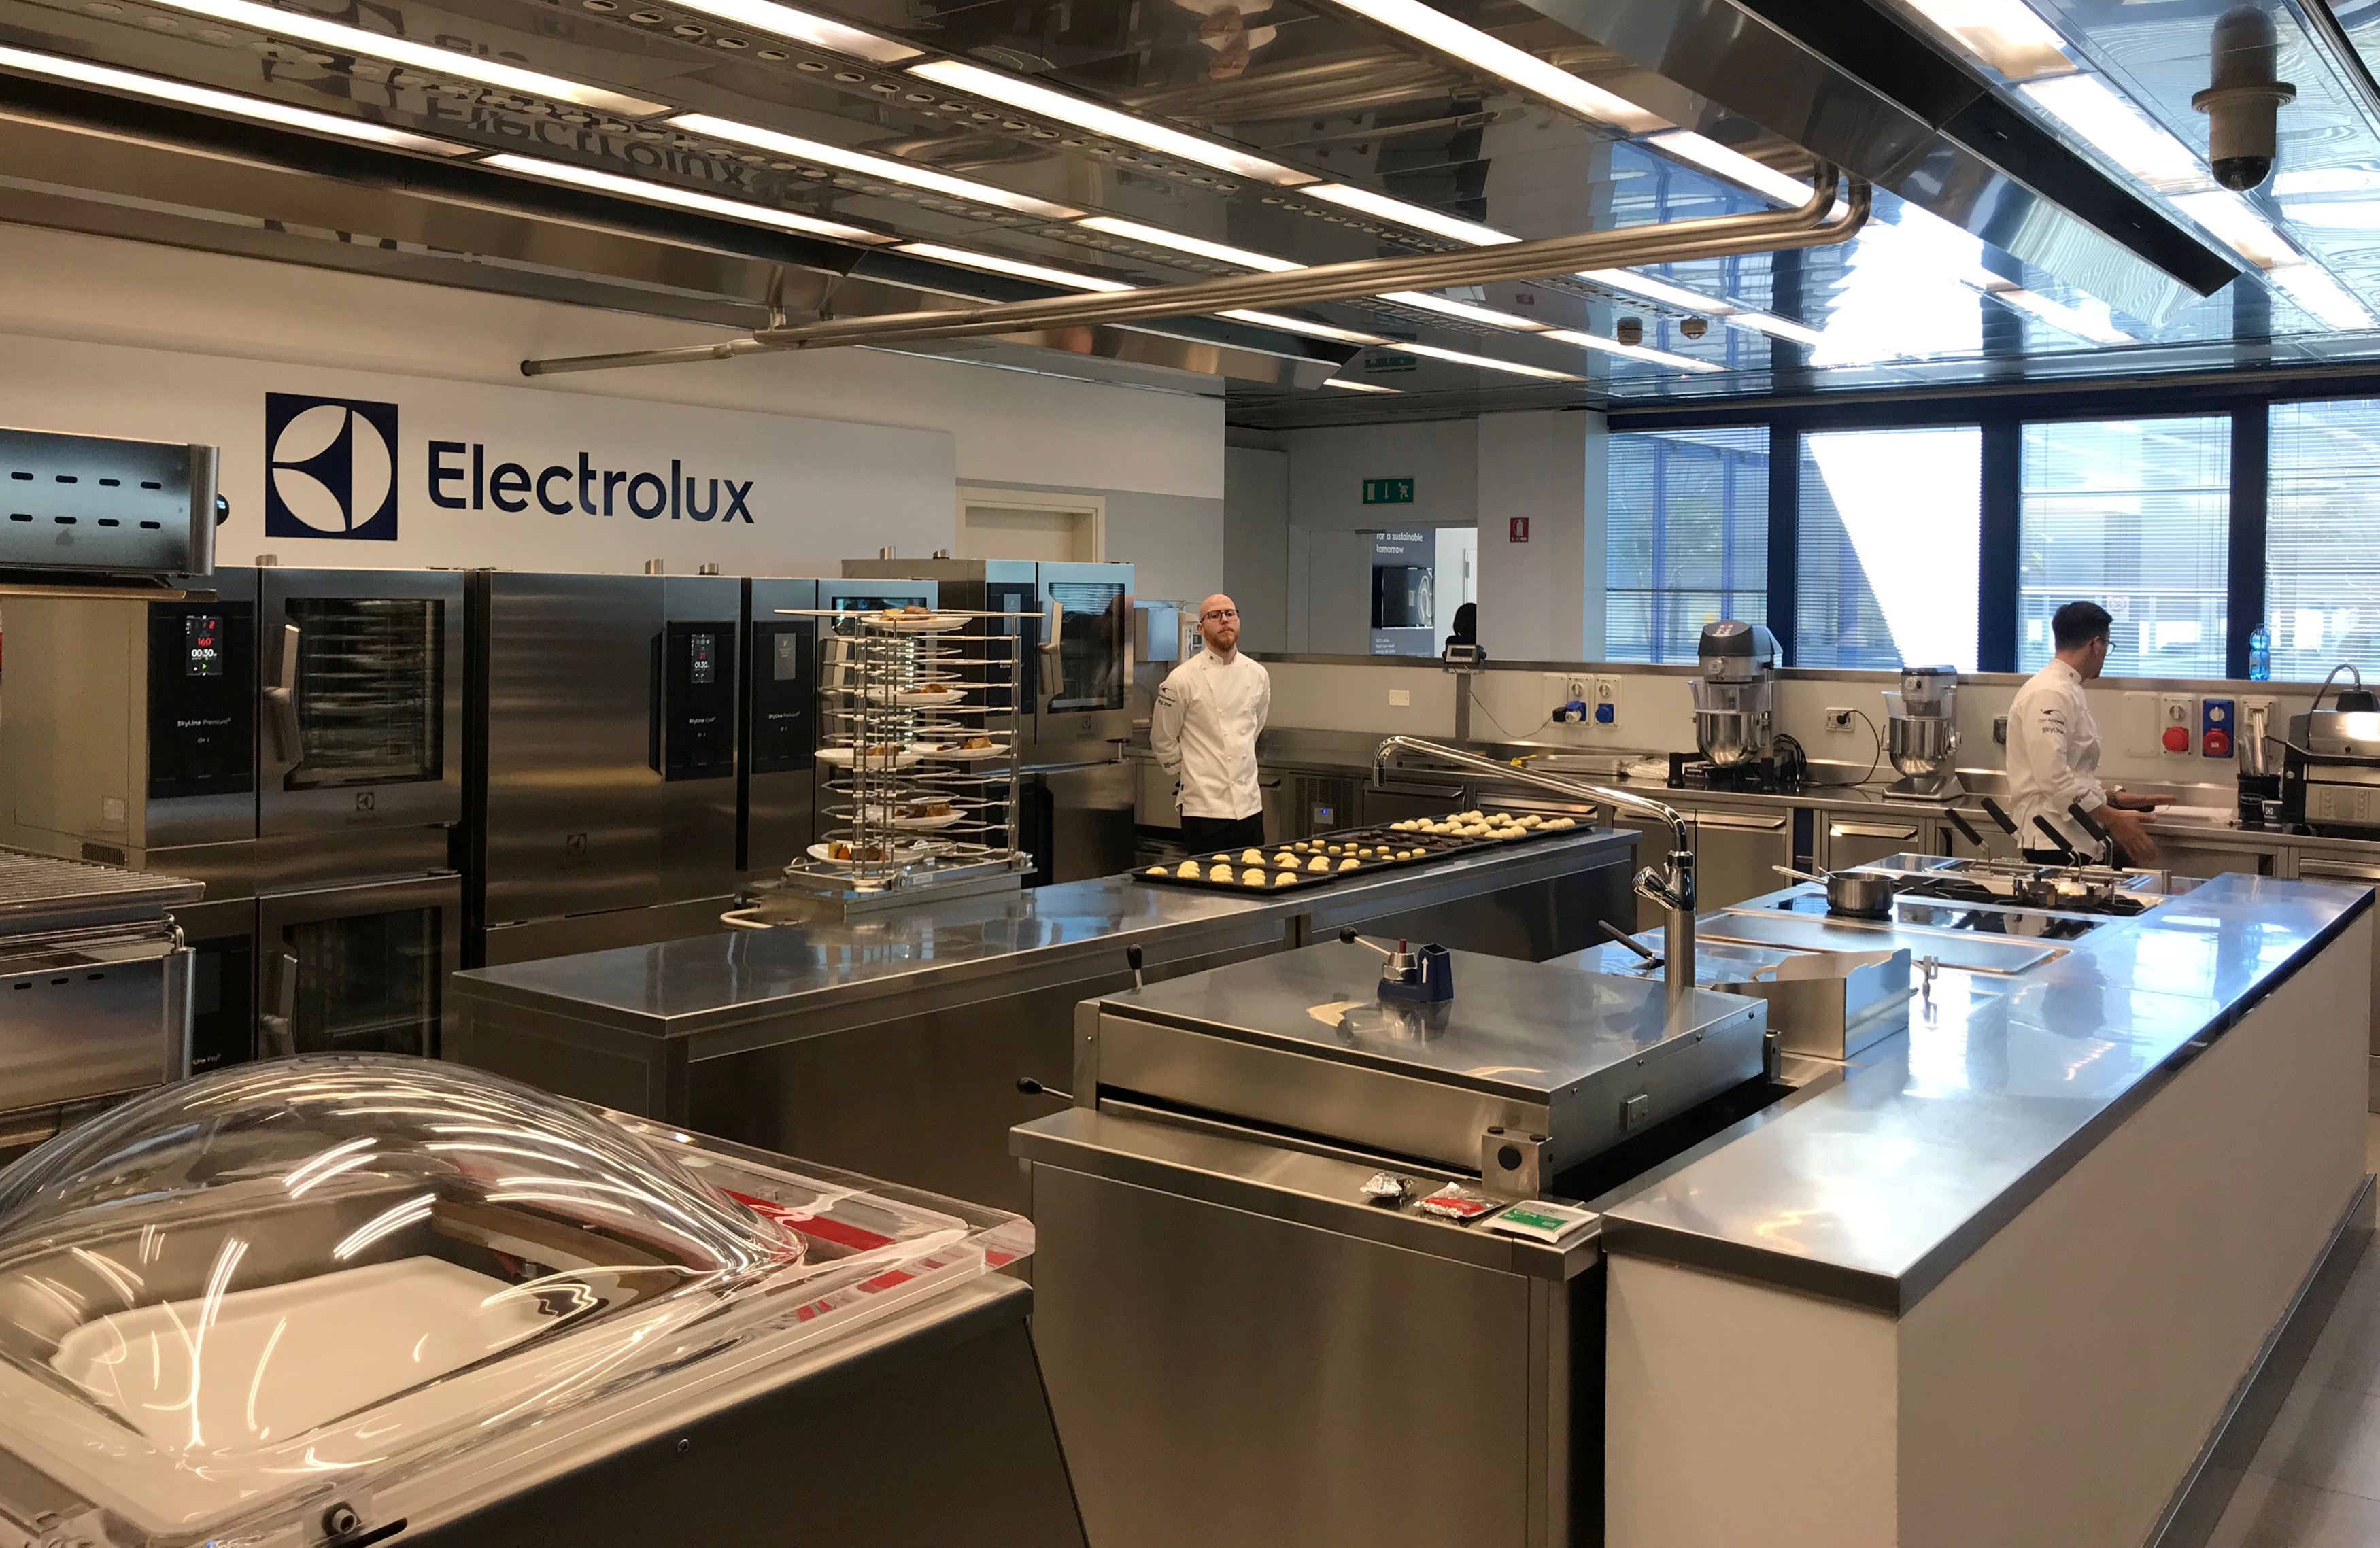 Electrolux shares hit lowest since 2012 on high costs, reluctant customers